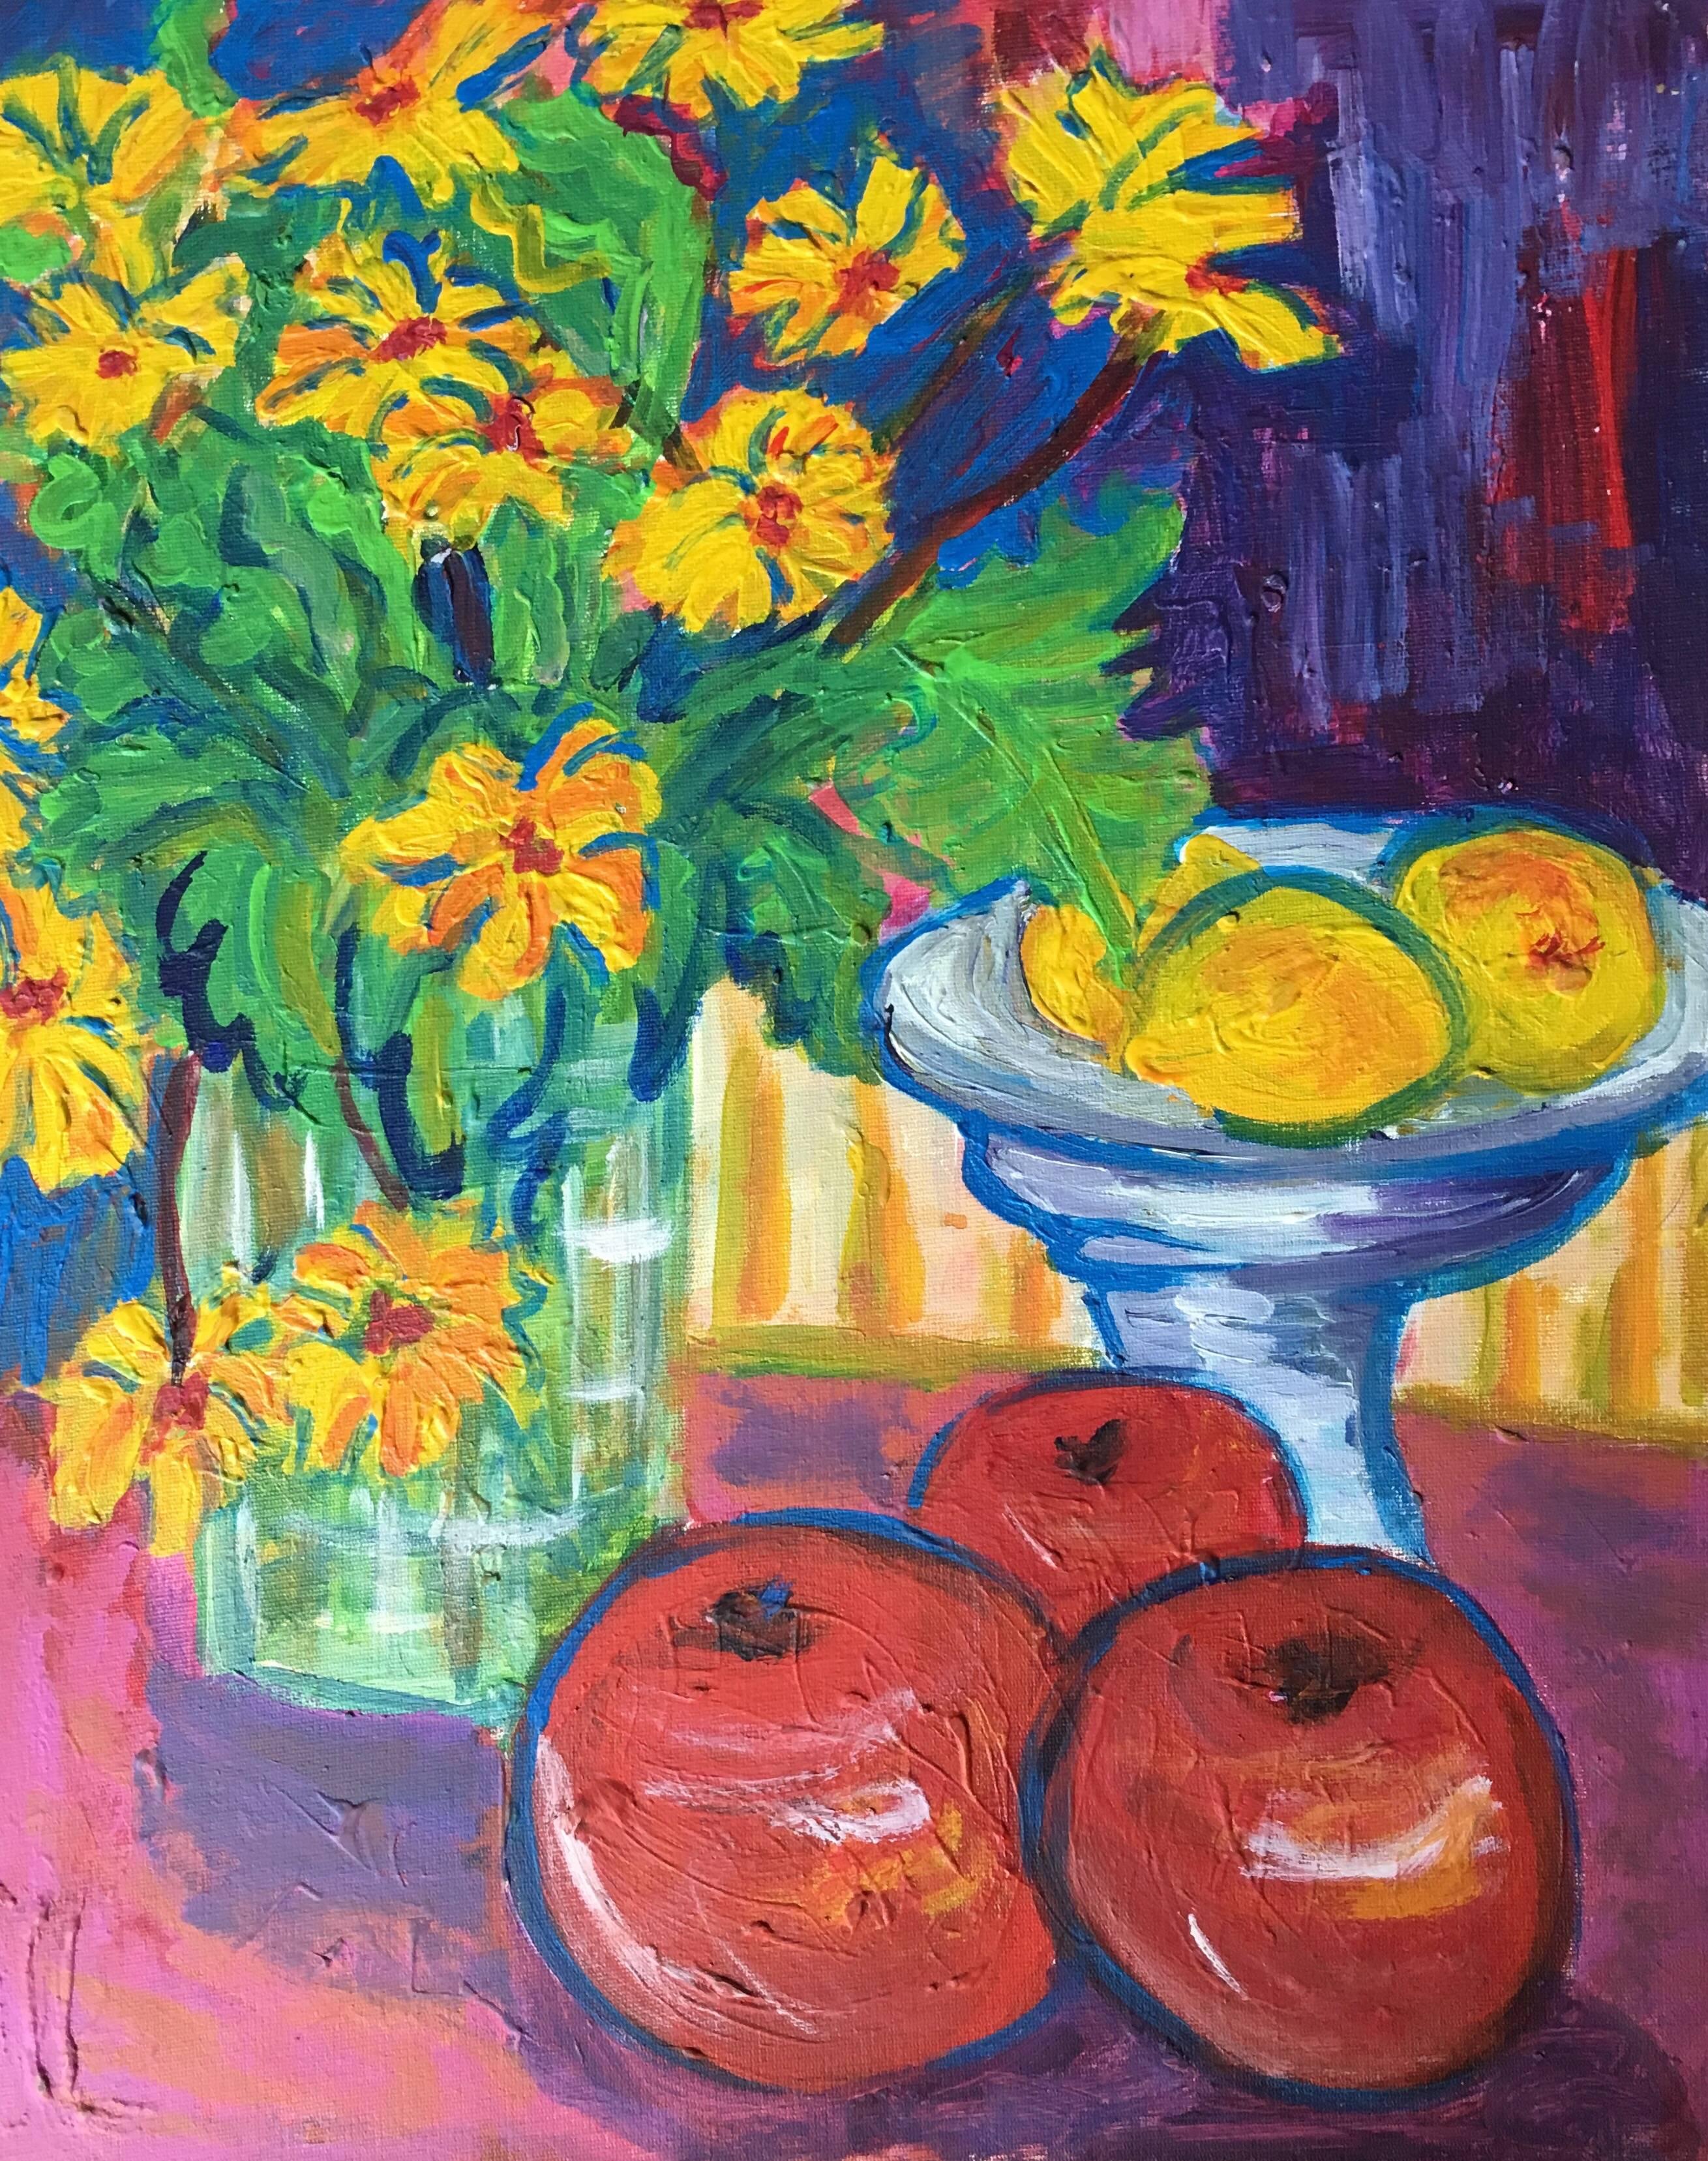 Impressionist Oil Painting of Daisies, Lemons and Apples